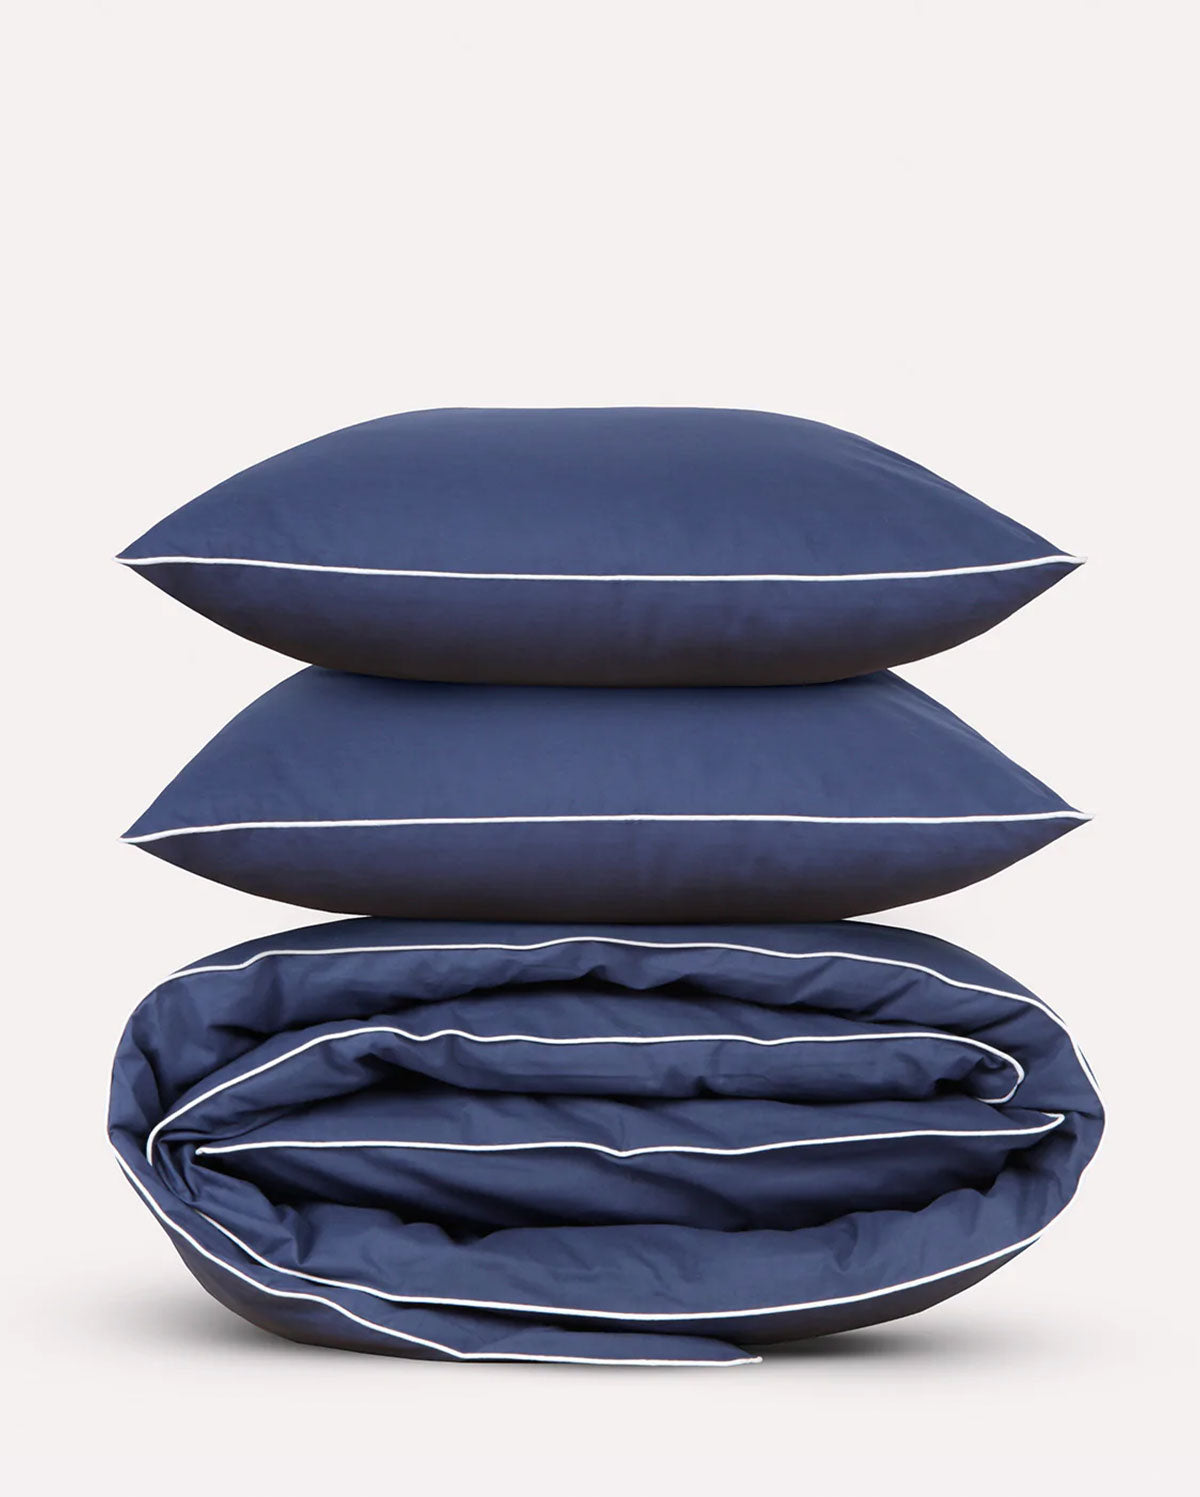 Classic Percale - Duvet Cover Set- Navy Blue with White Piped Edge